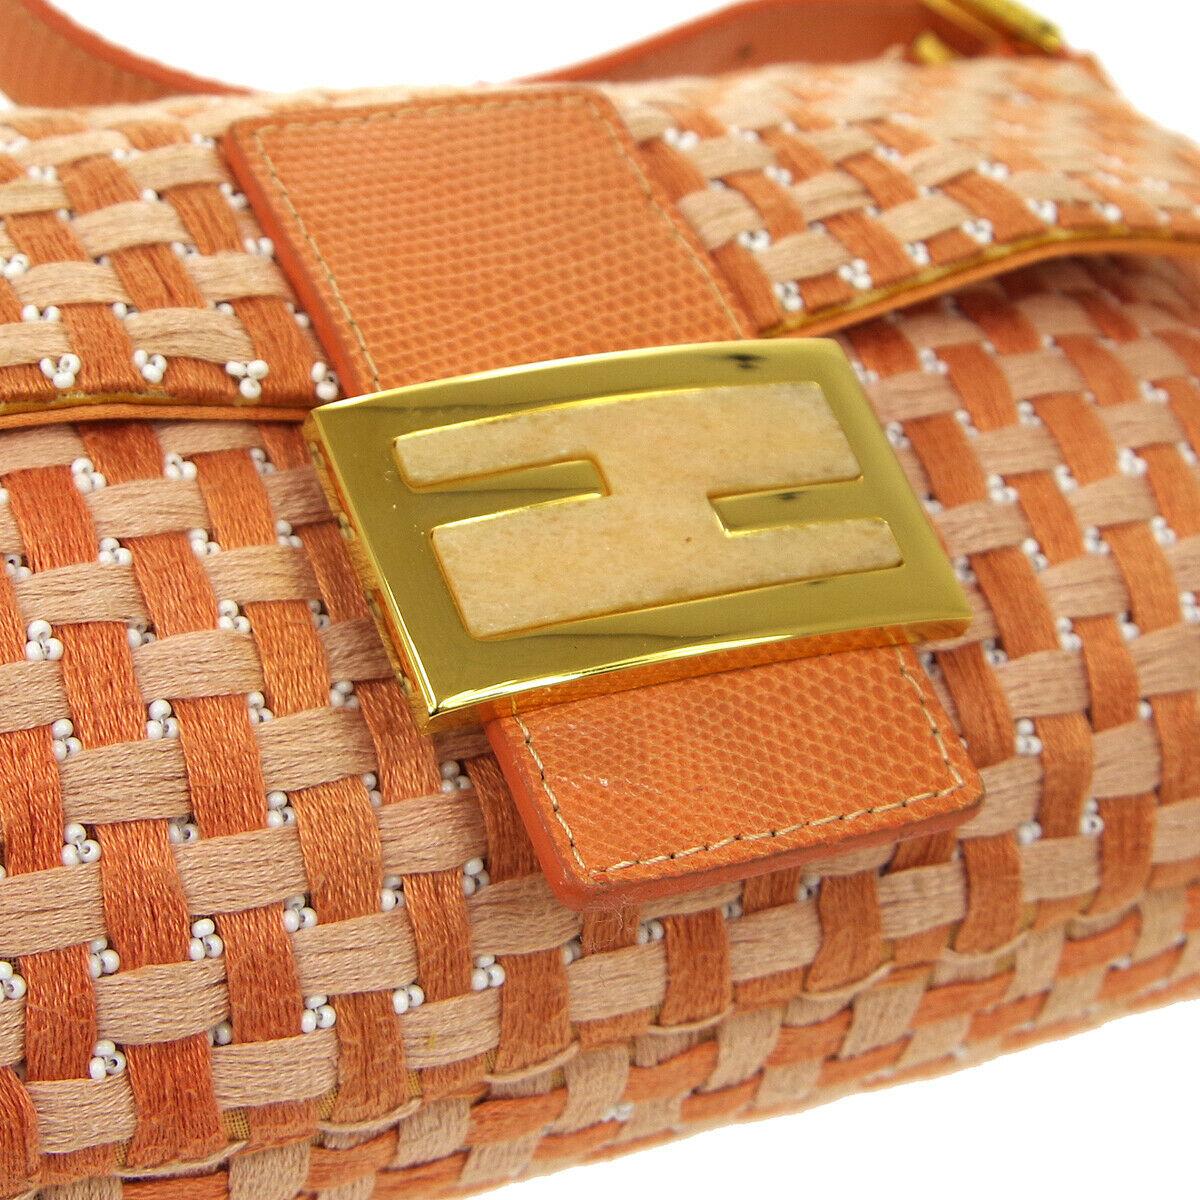 
Woven
Lizard leather
Bead
Gold tone hardware
Buckle closure
Satin lining
Made in Italy
Adjustable strap drop 4-7